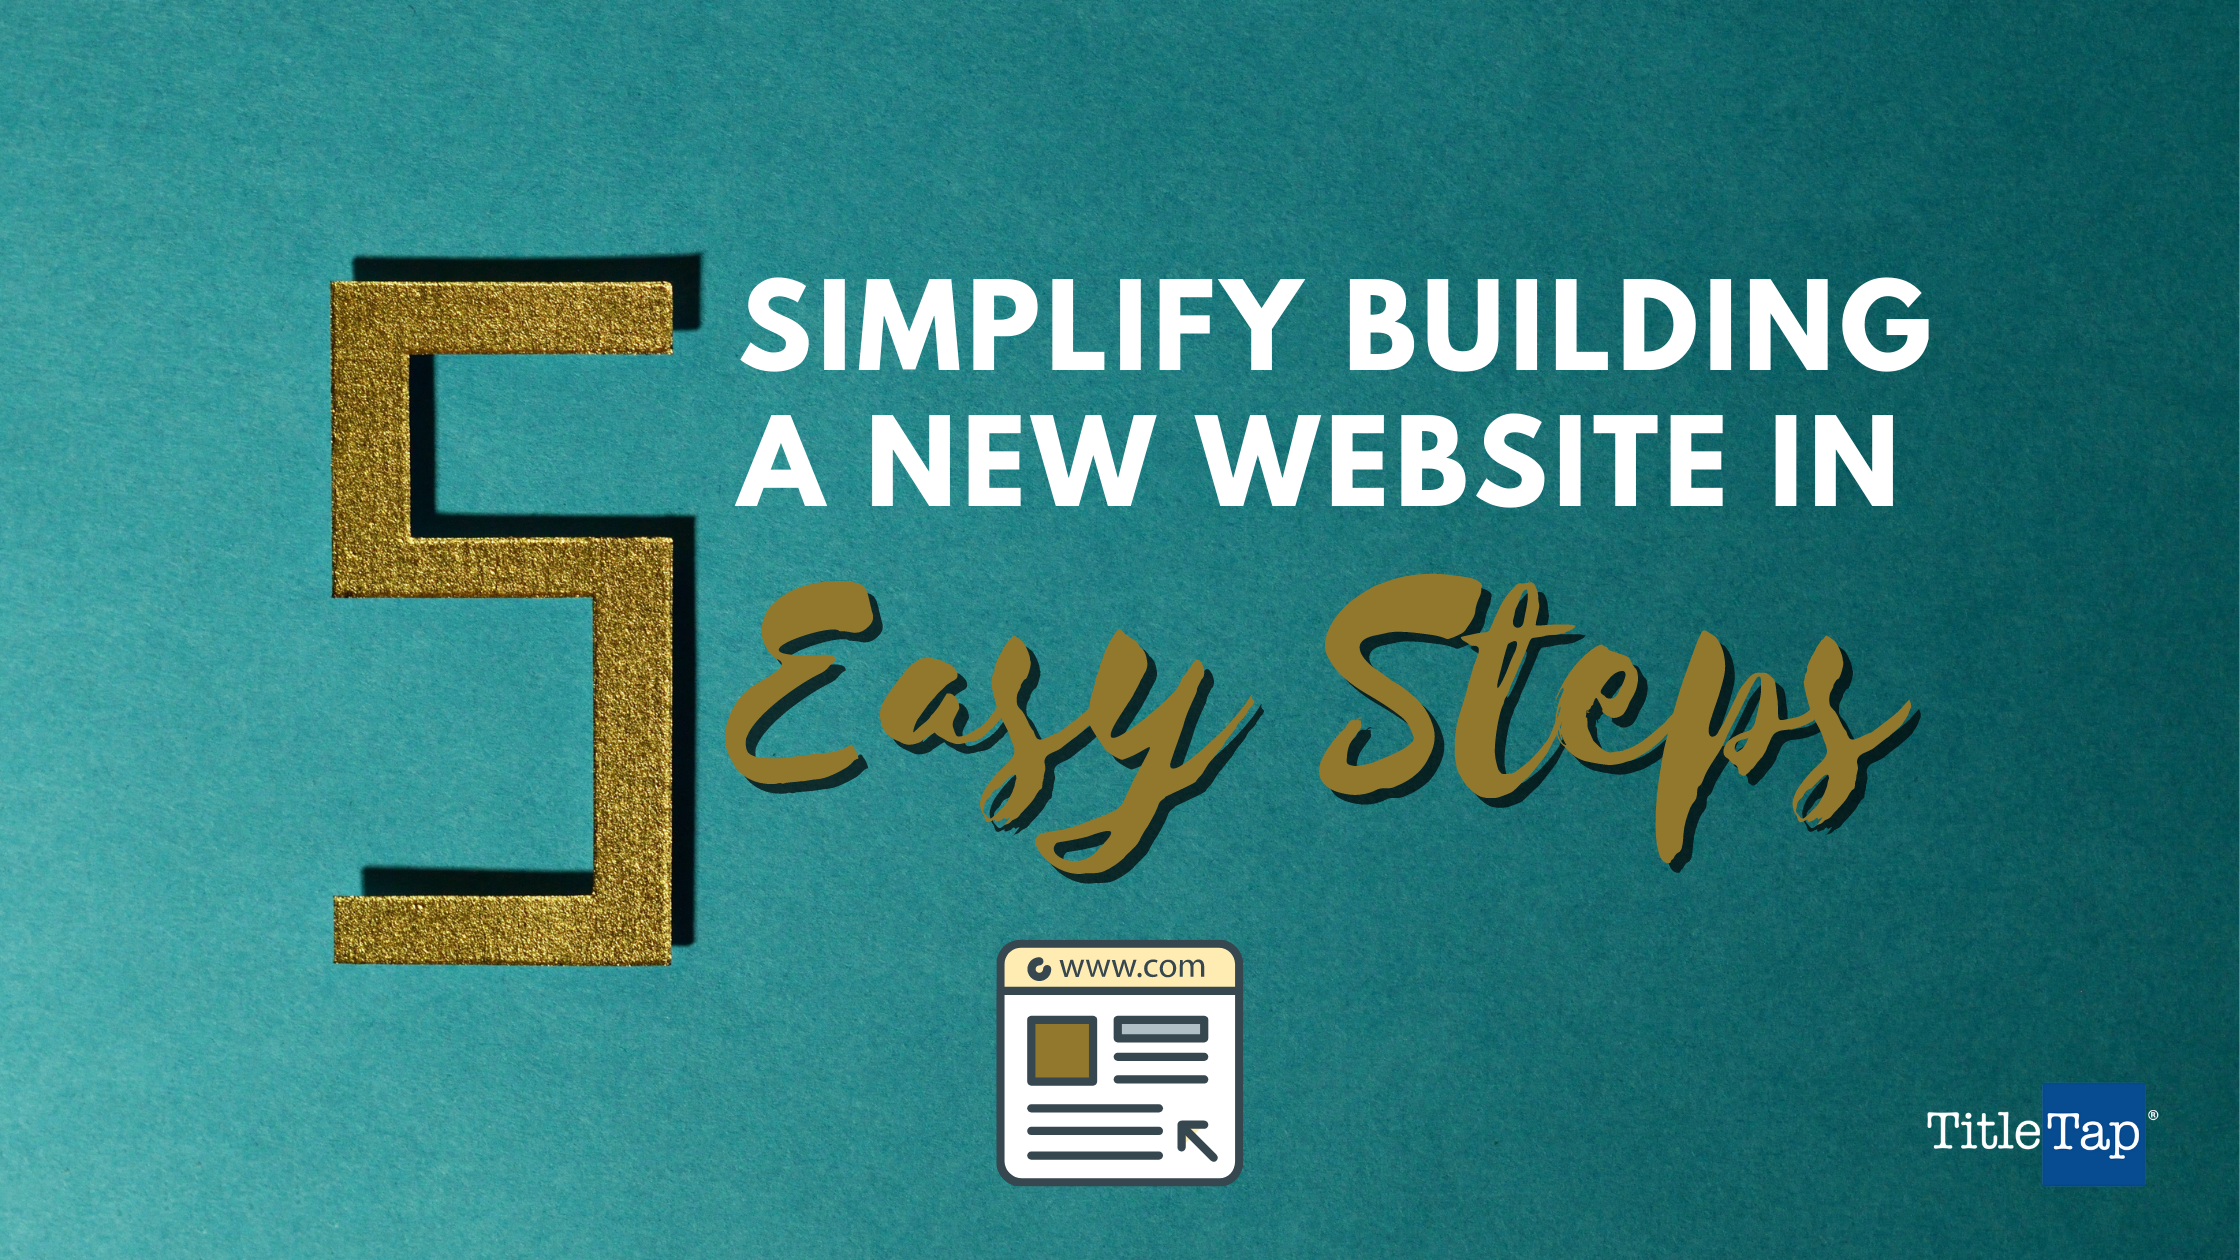 How to simplify the website process in 5 easy steps